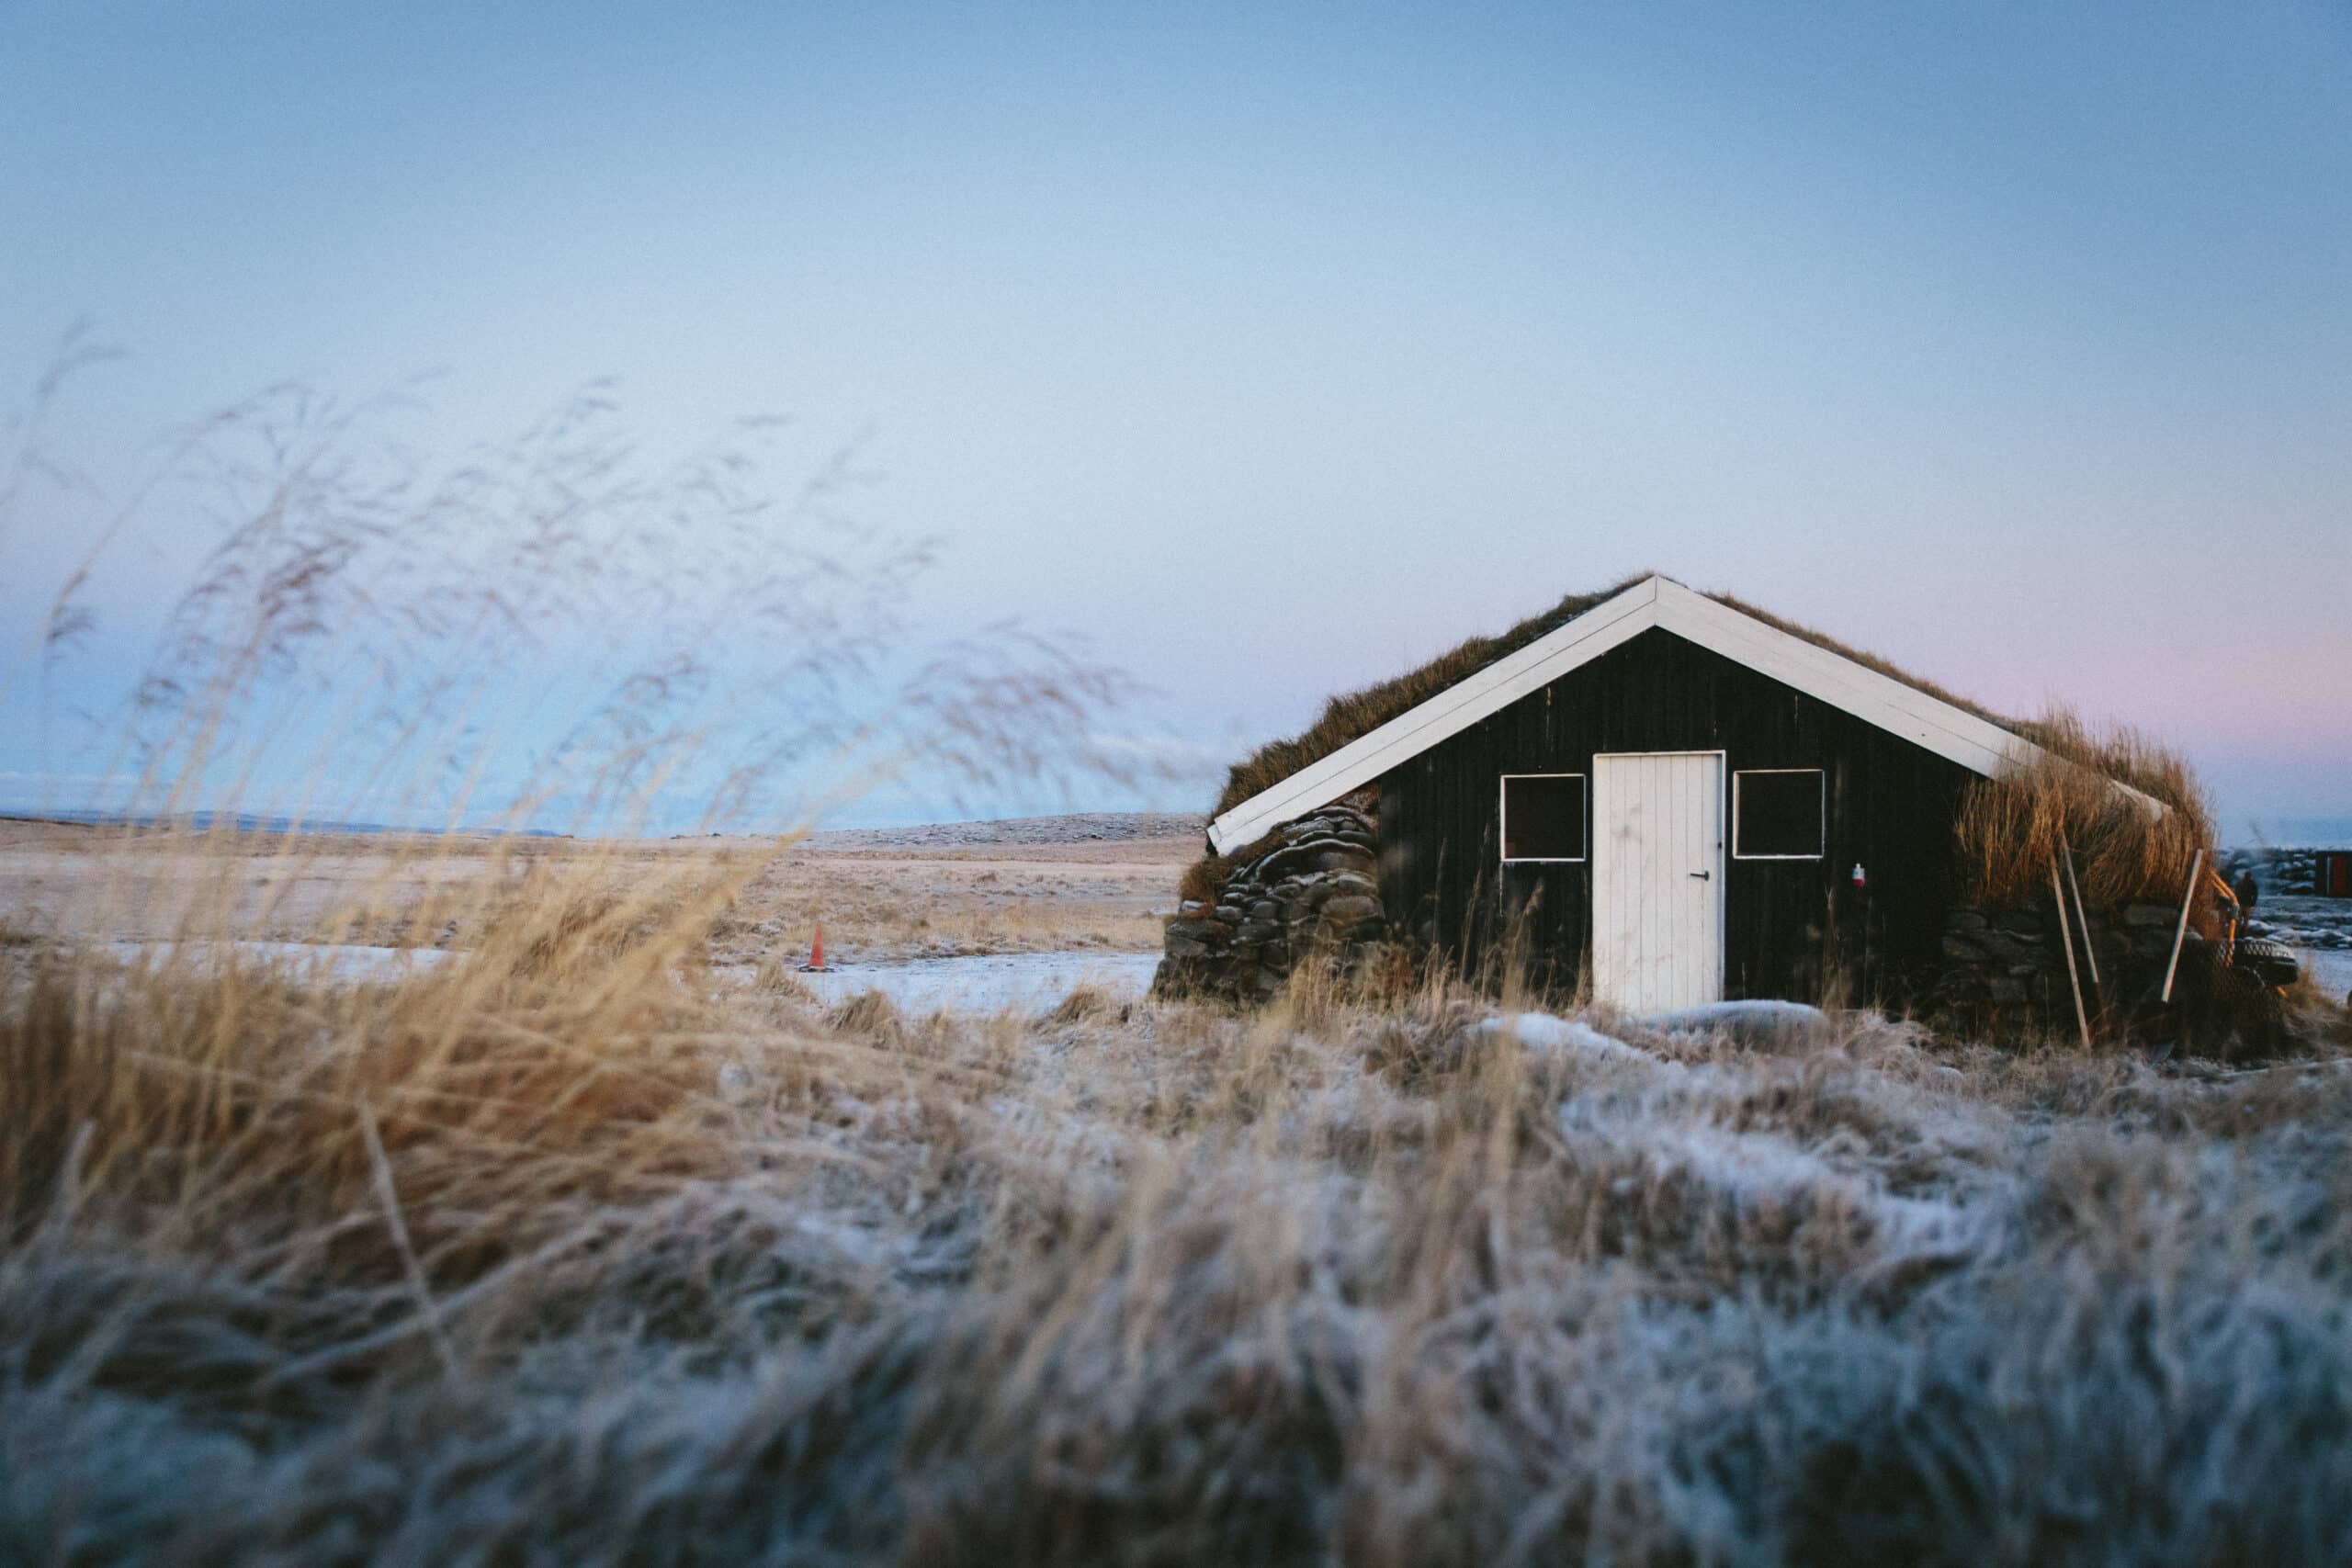 Winter Photography Exercise: Create a Winter Photo Series